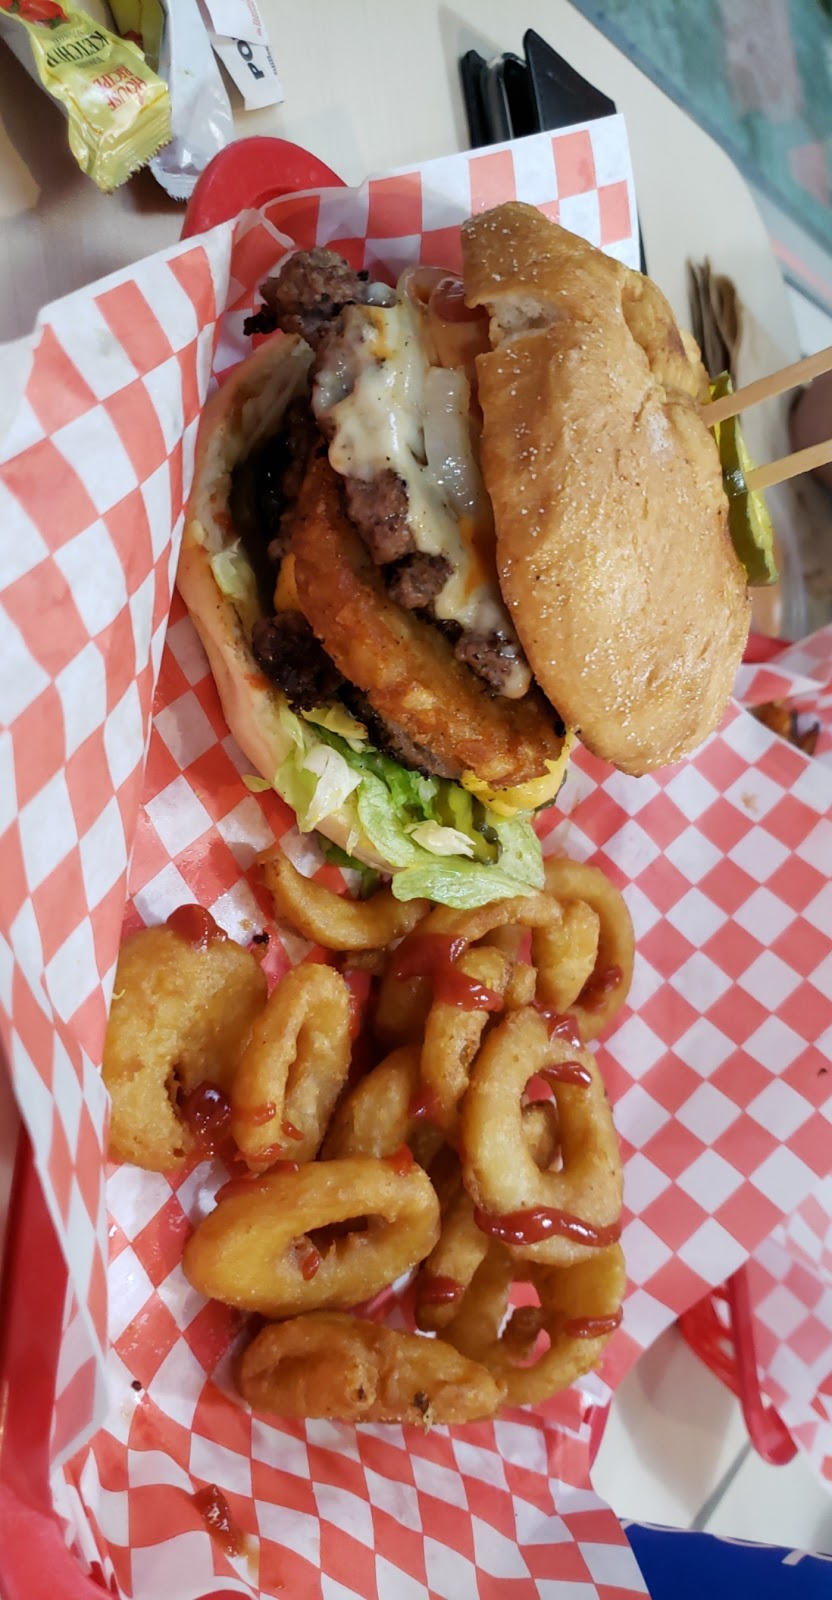 Charger Gourmet Burger & poutine | 392 Pleasant St, Dartmouth, NS B2Y 3S5, Canada | Phone: (902) 469-6749